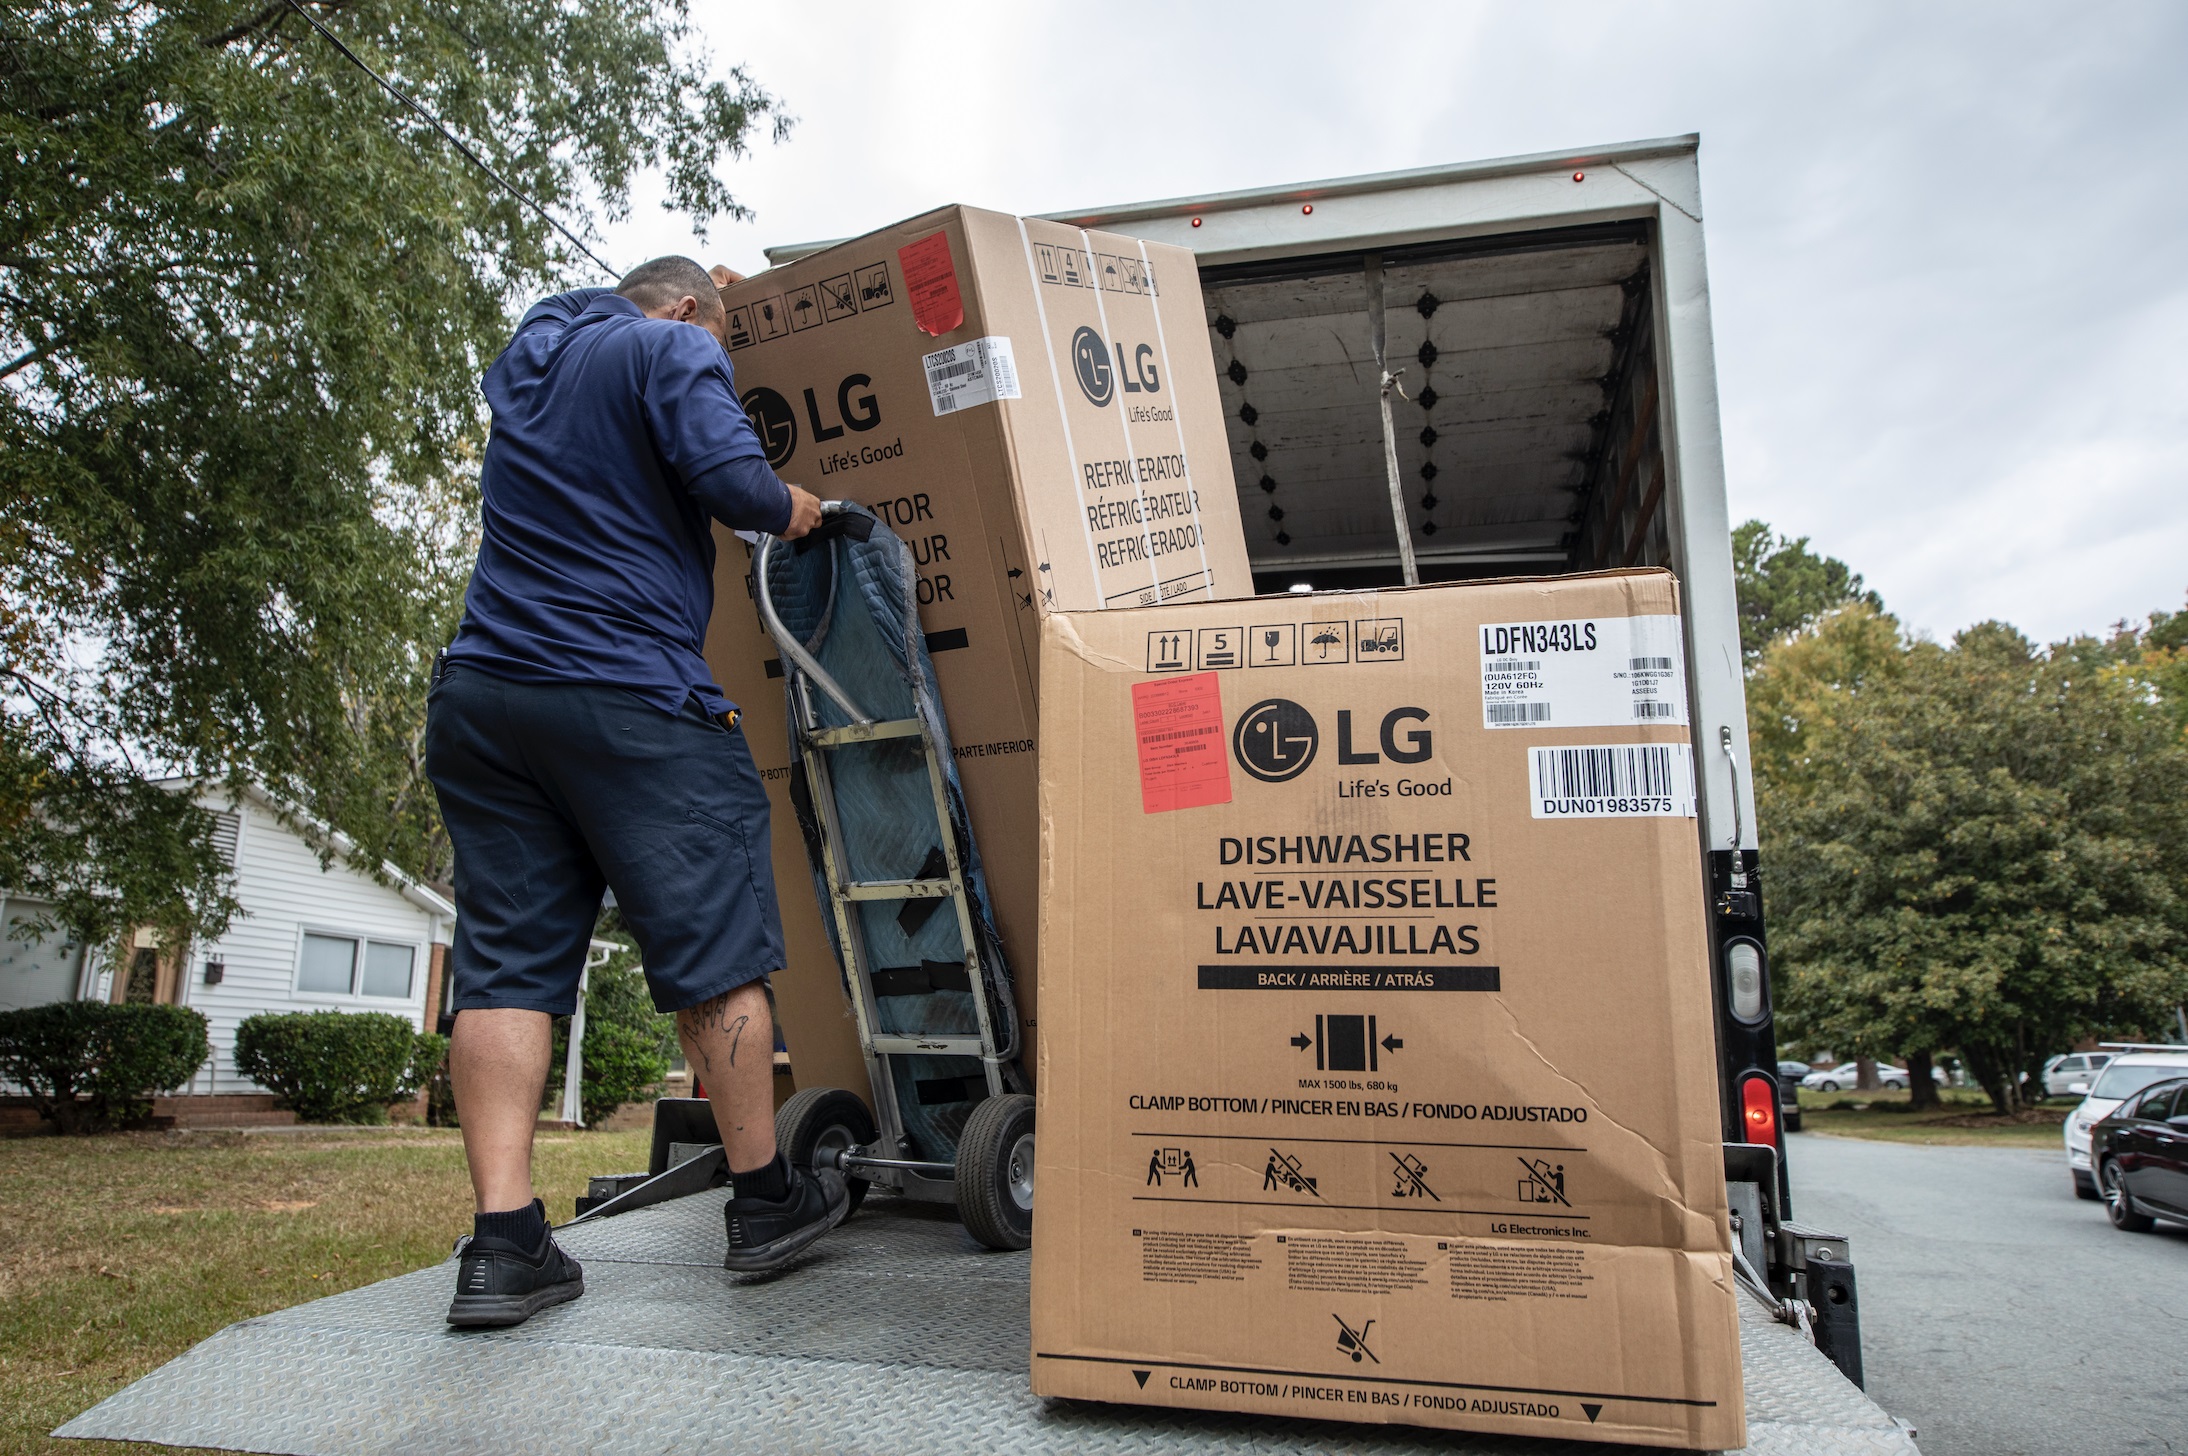 A volunteer carefully unloading the donated LG appliances from a truck